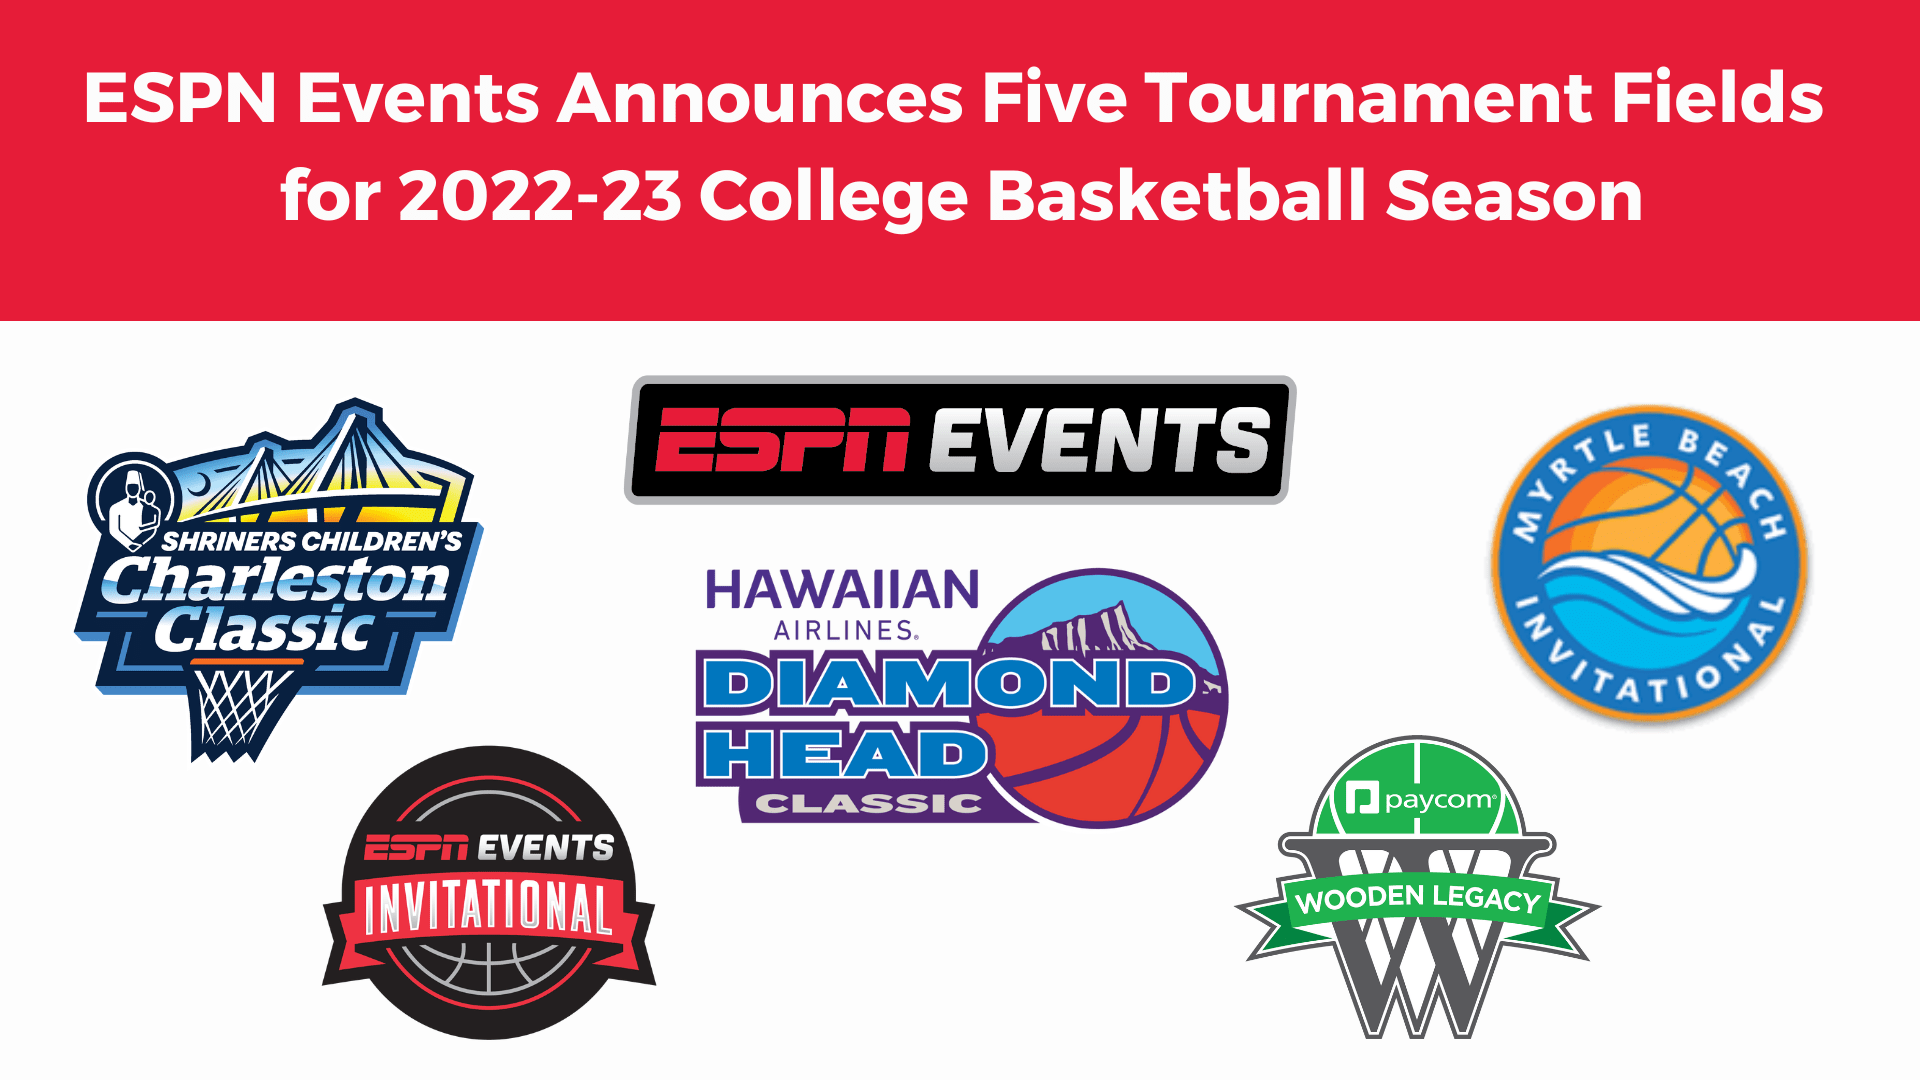 ESPN Events Unveils Teams for Five Mens College Basketball Tournaments During 2022-23 College Basketball Season